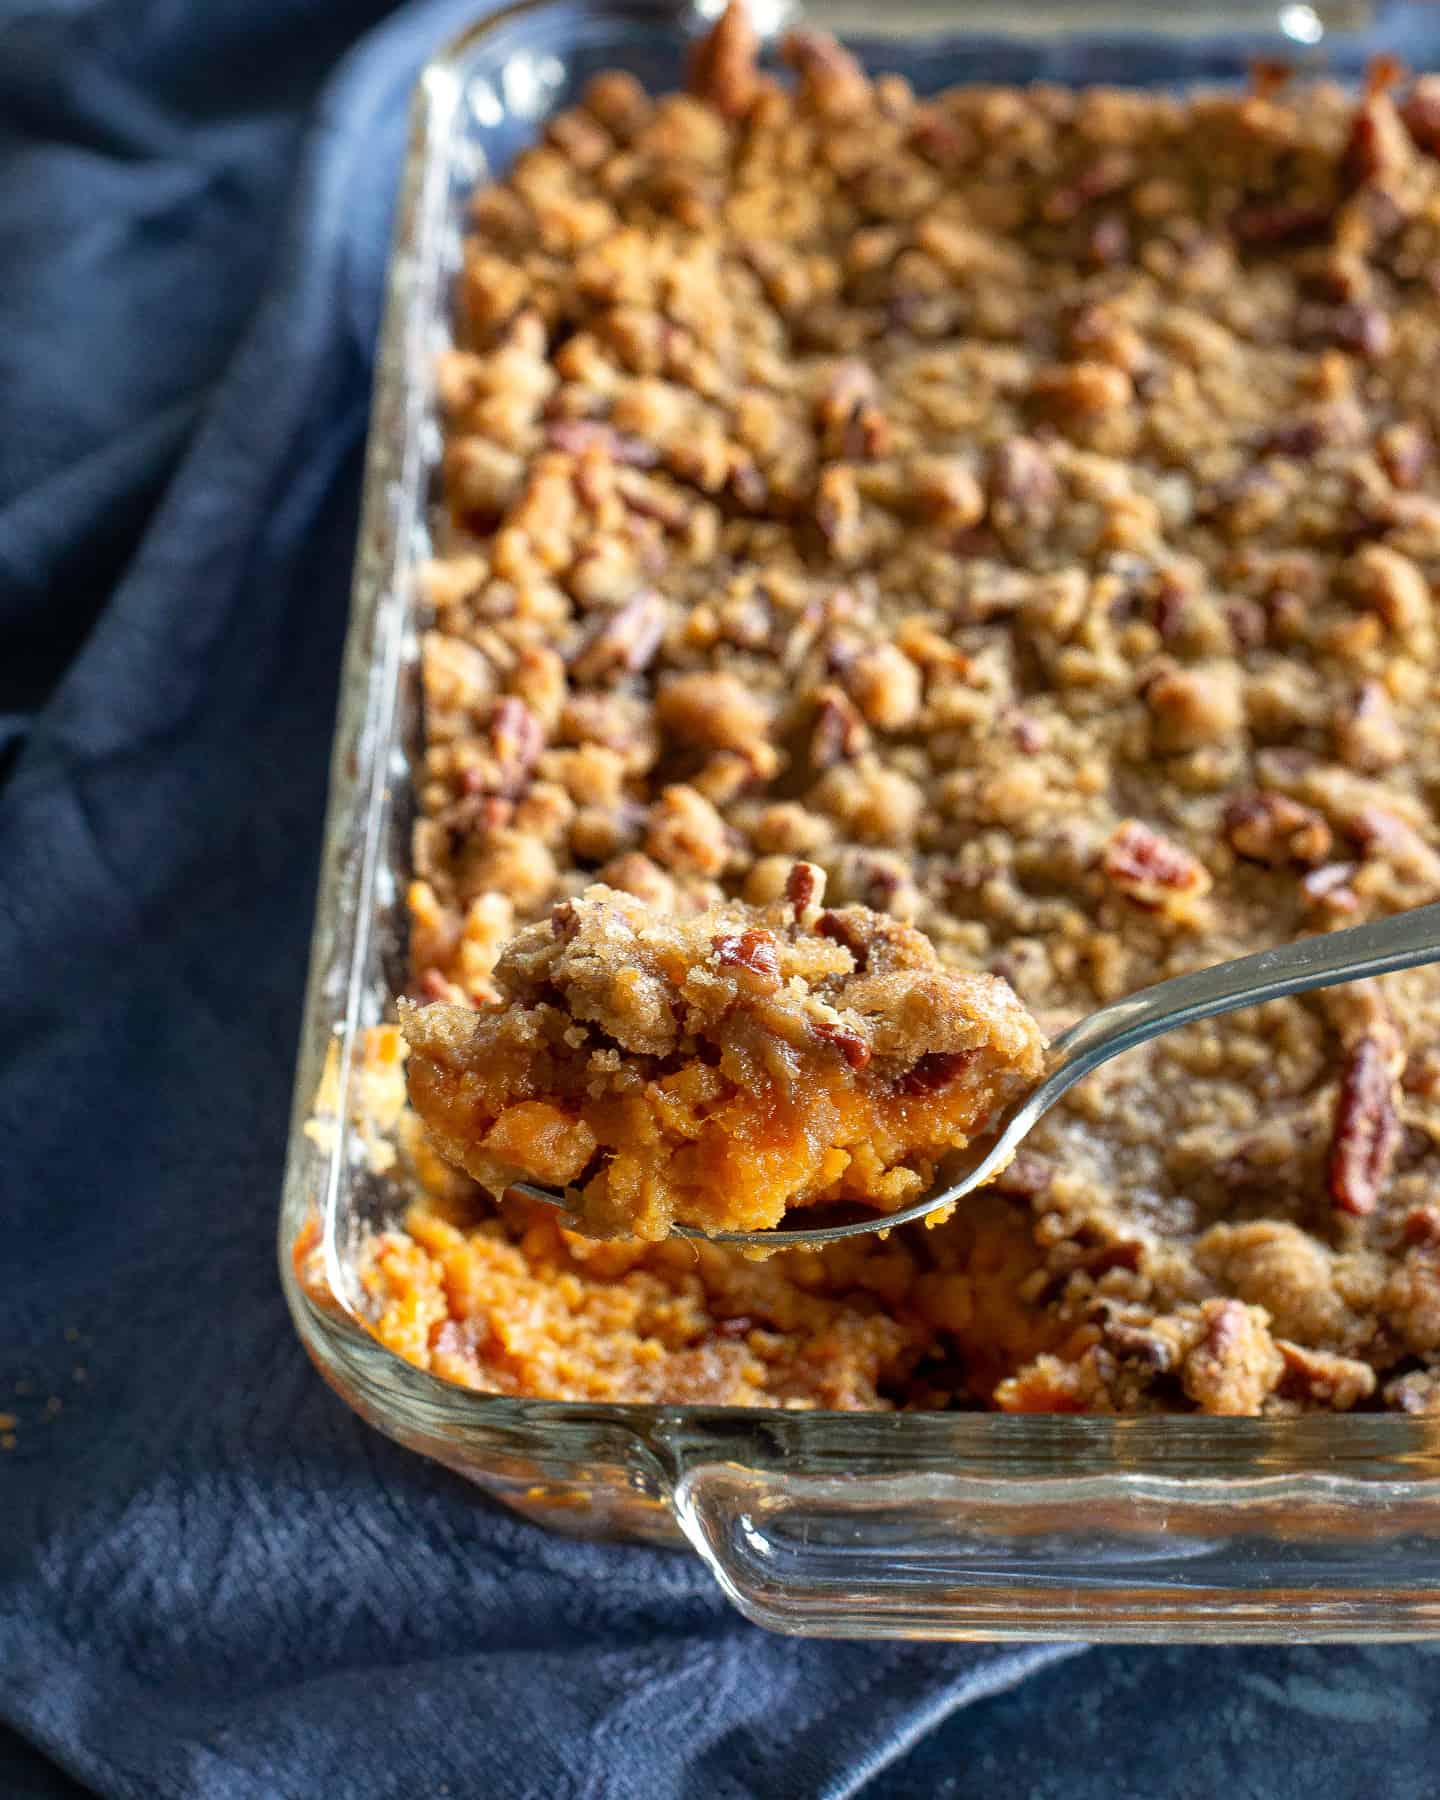 https://www.the-girl-who-ate-everything.com/wp-content/uploads/2020/11/sweet-potato-casserole-19.jpg